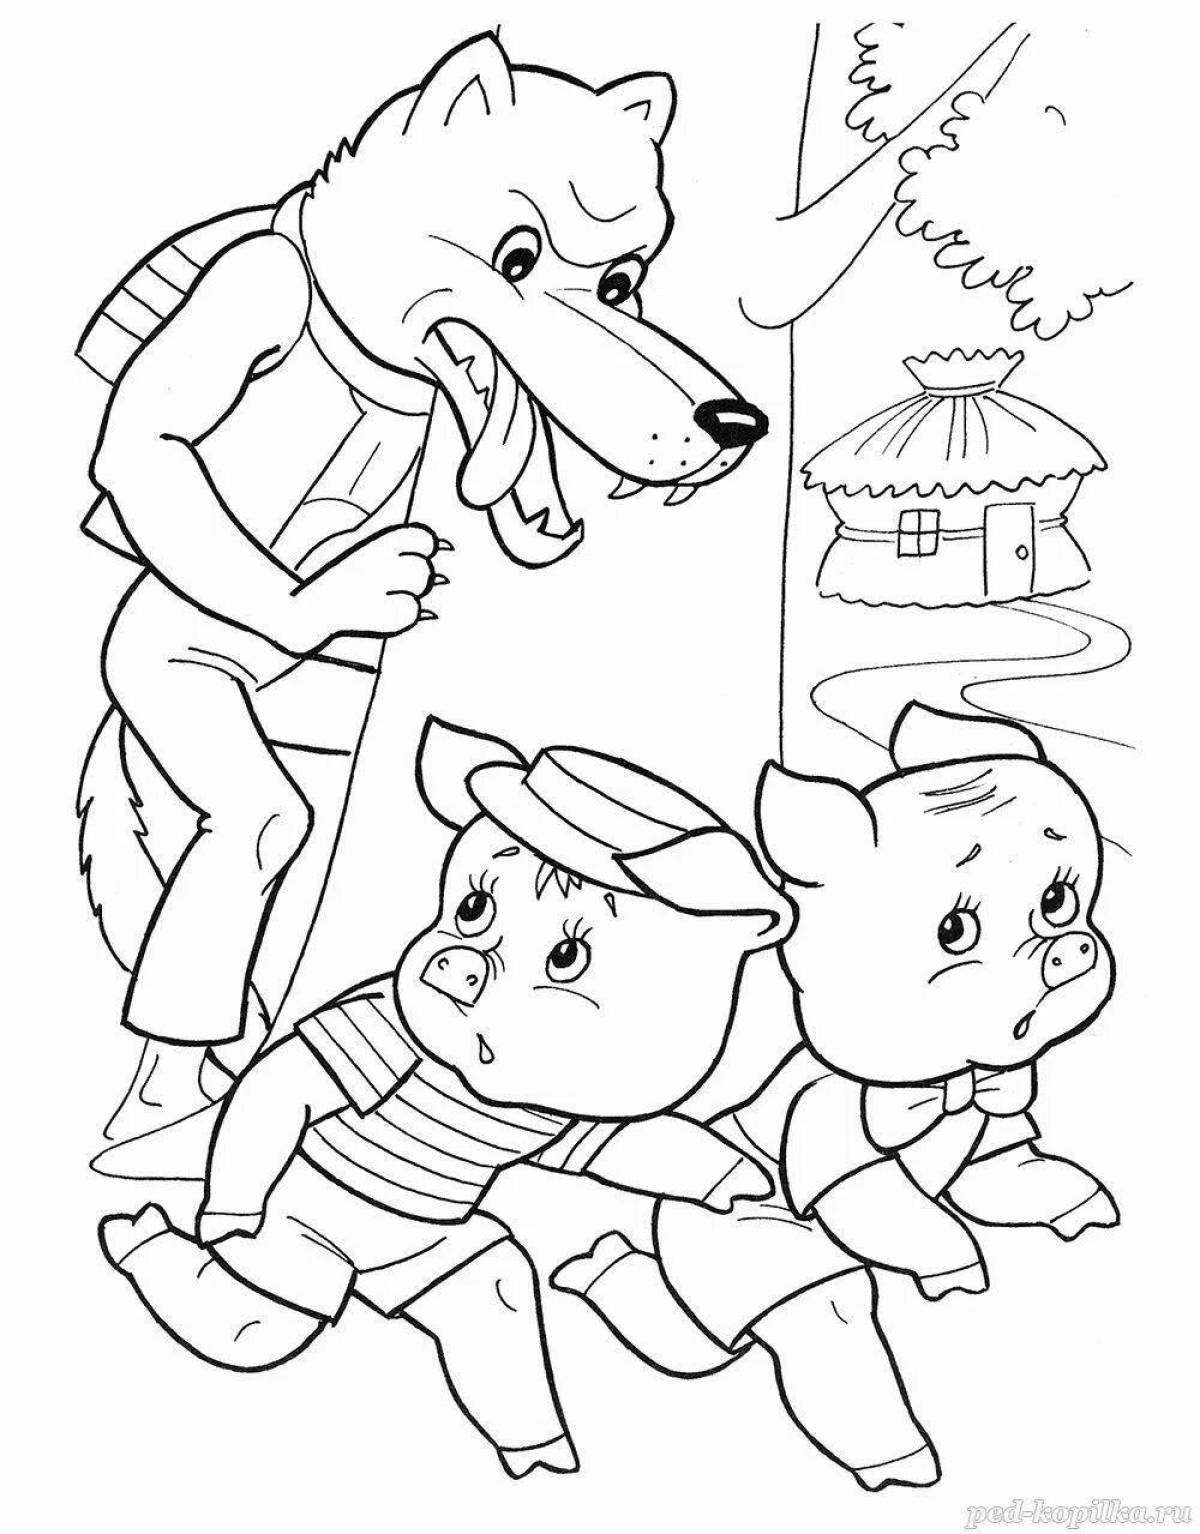 Coloring 3 little pigs for kids